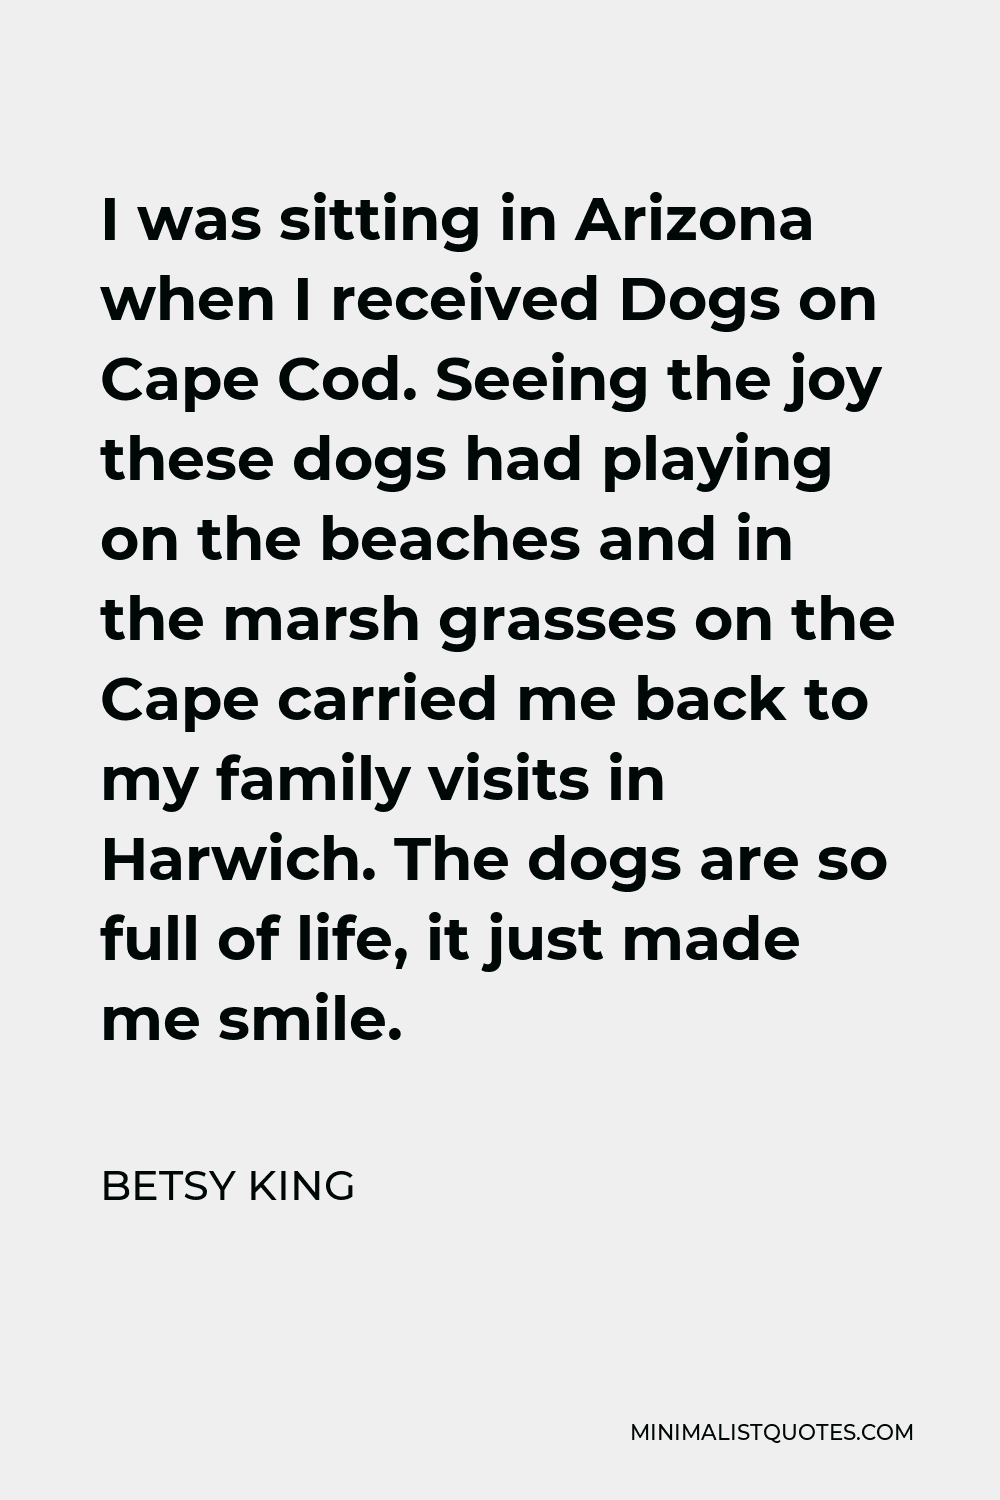 Betsy King Quote - I was sitting in Arizona when I received Dogs on Cape Cod. Seeing the joy these dogs had playing on the beaches and in the marsh grasses on the Cape carried me back to my family visits in Harwich. The dogs are so full of life, it just made me smile.